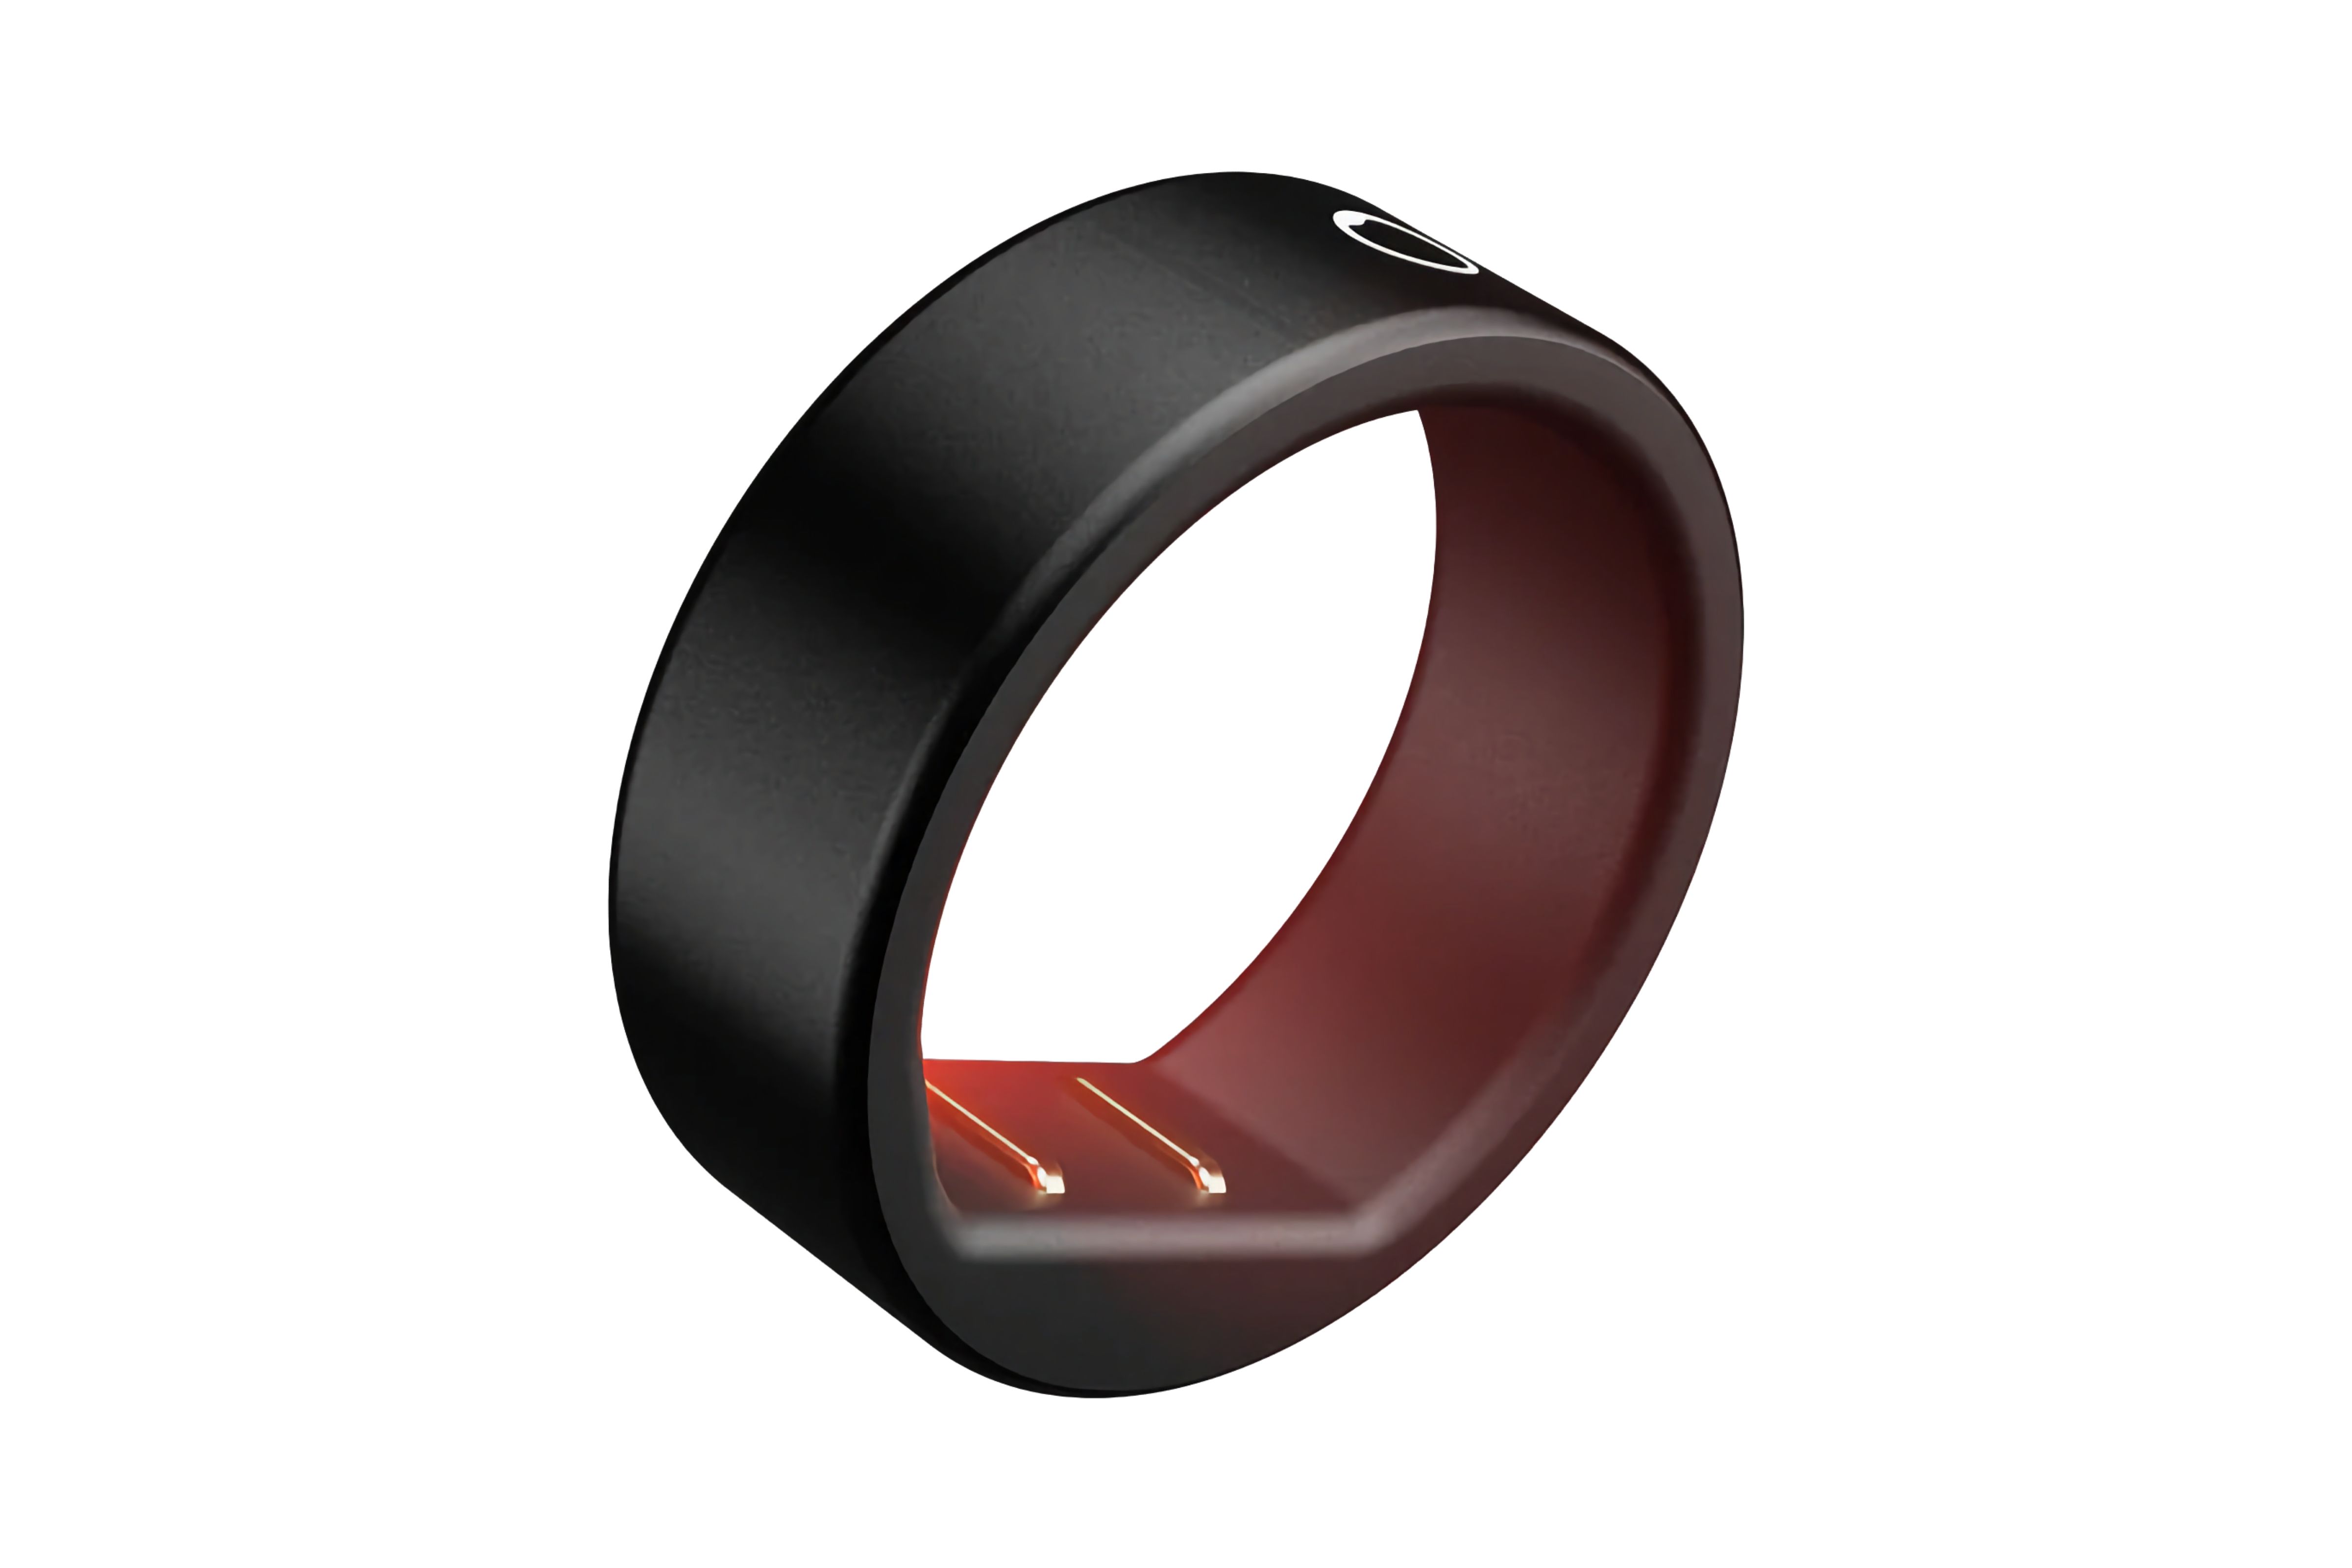 A matte black fitness ring with a flat tire design and exposed sensors on the inside.